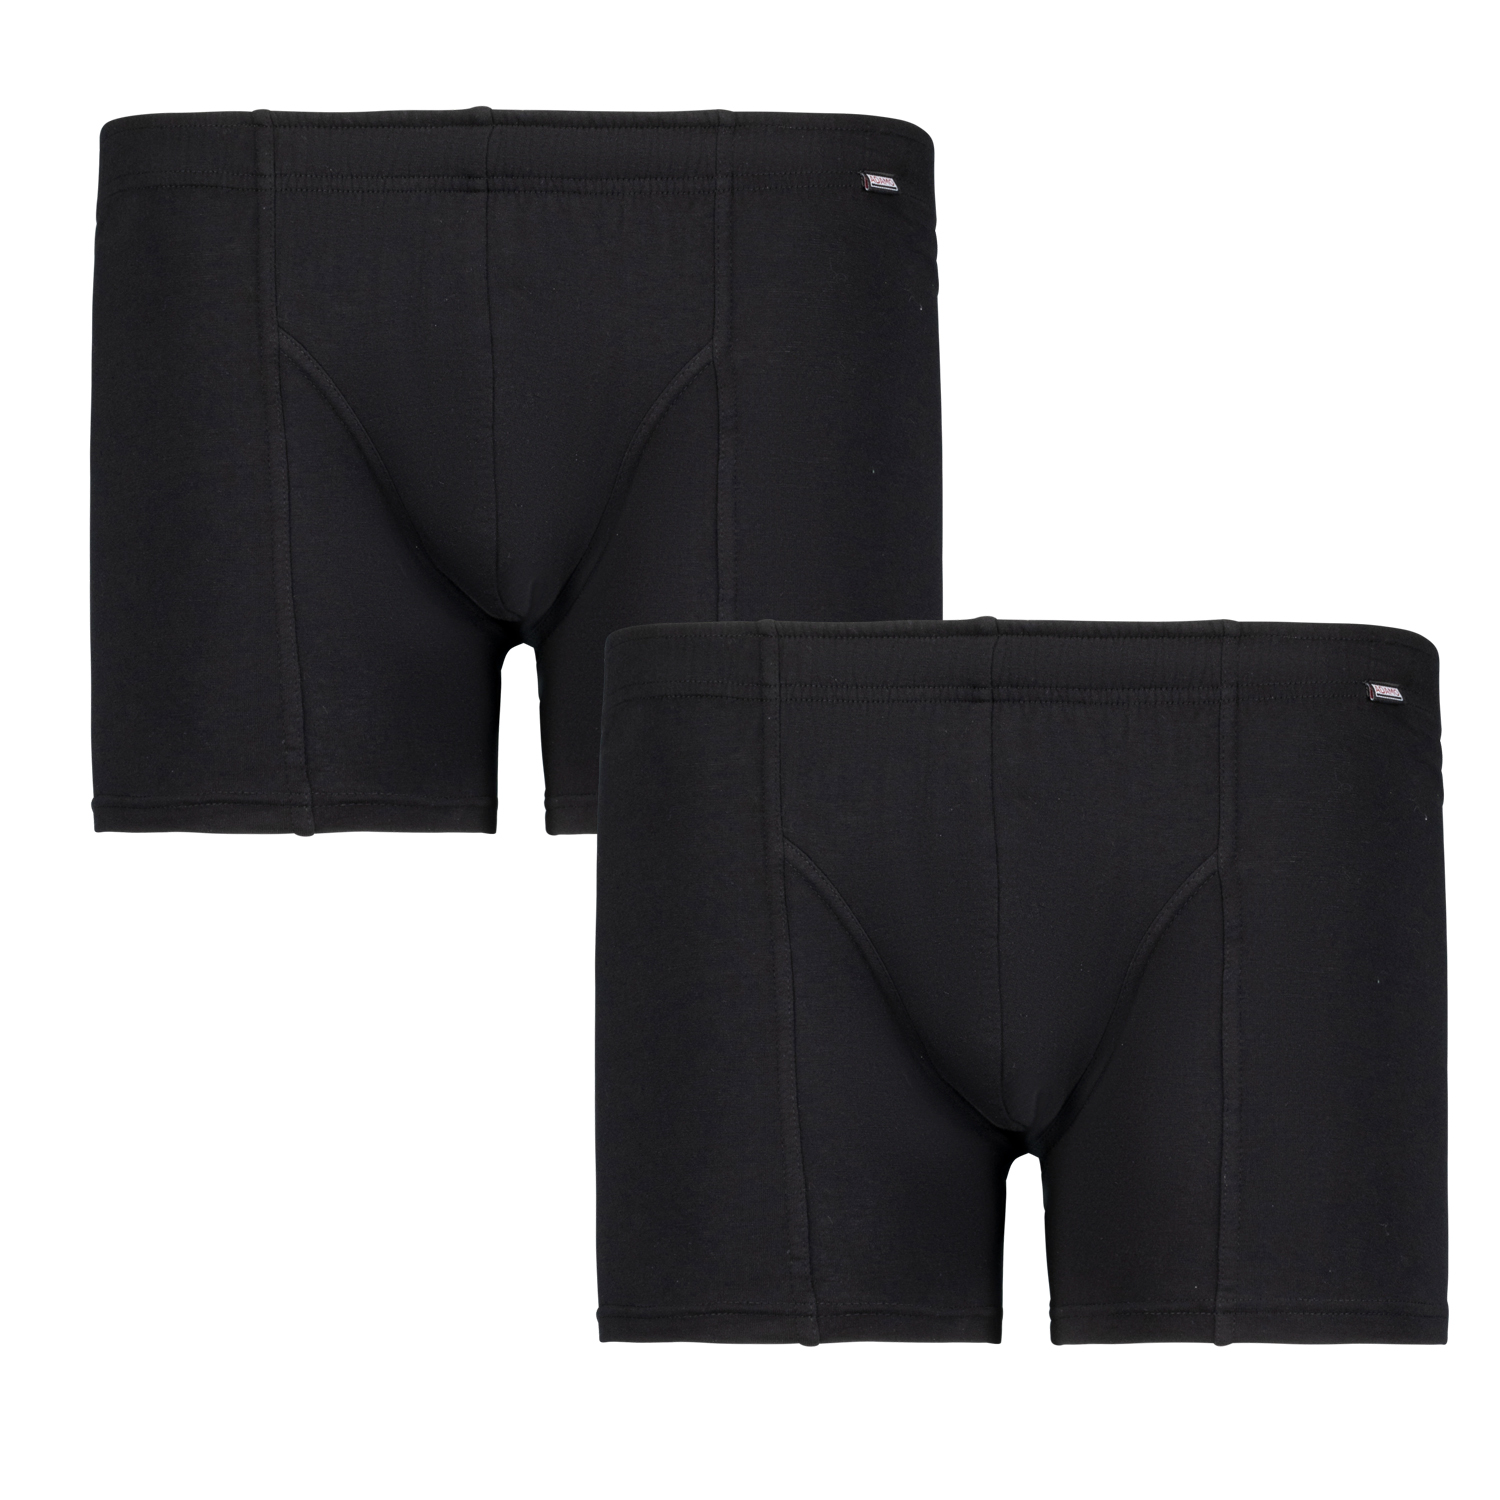 Black double pack JACK maxipants from ADAMO up to plus size 20